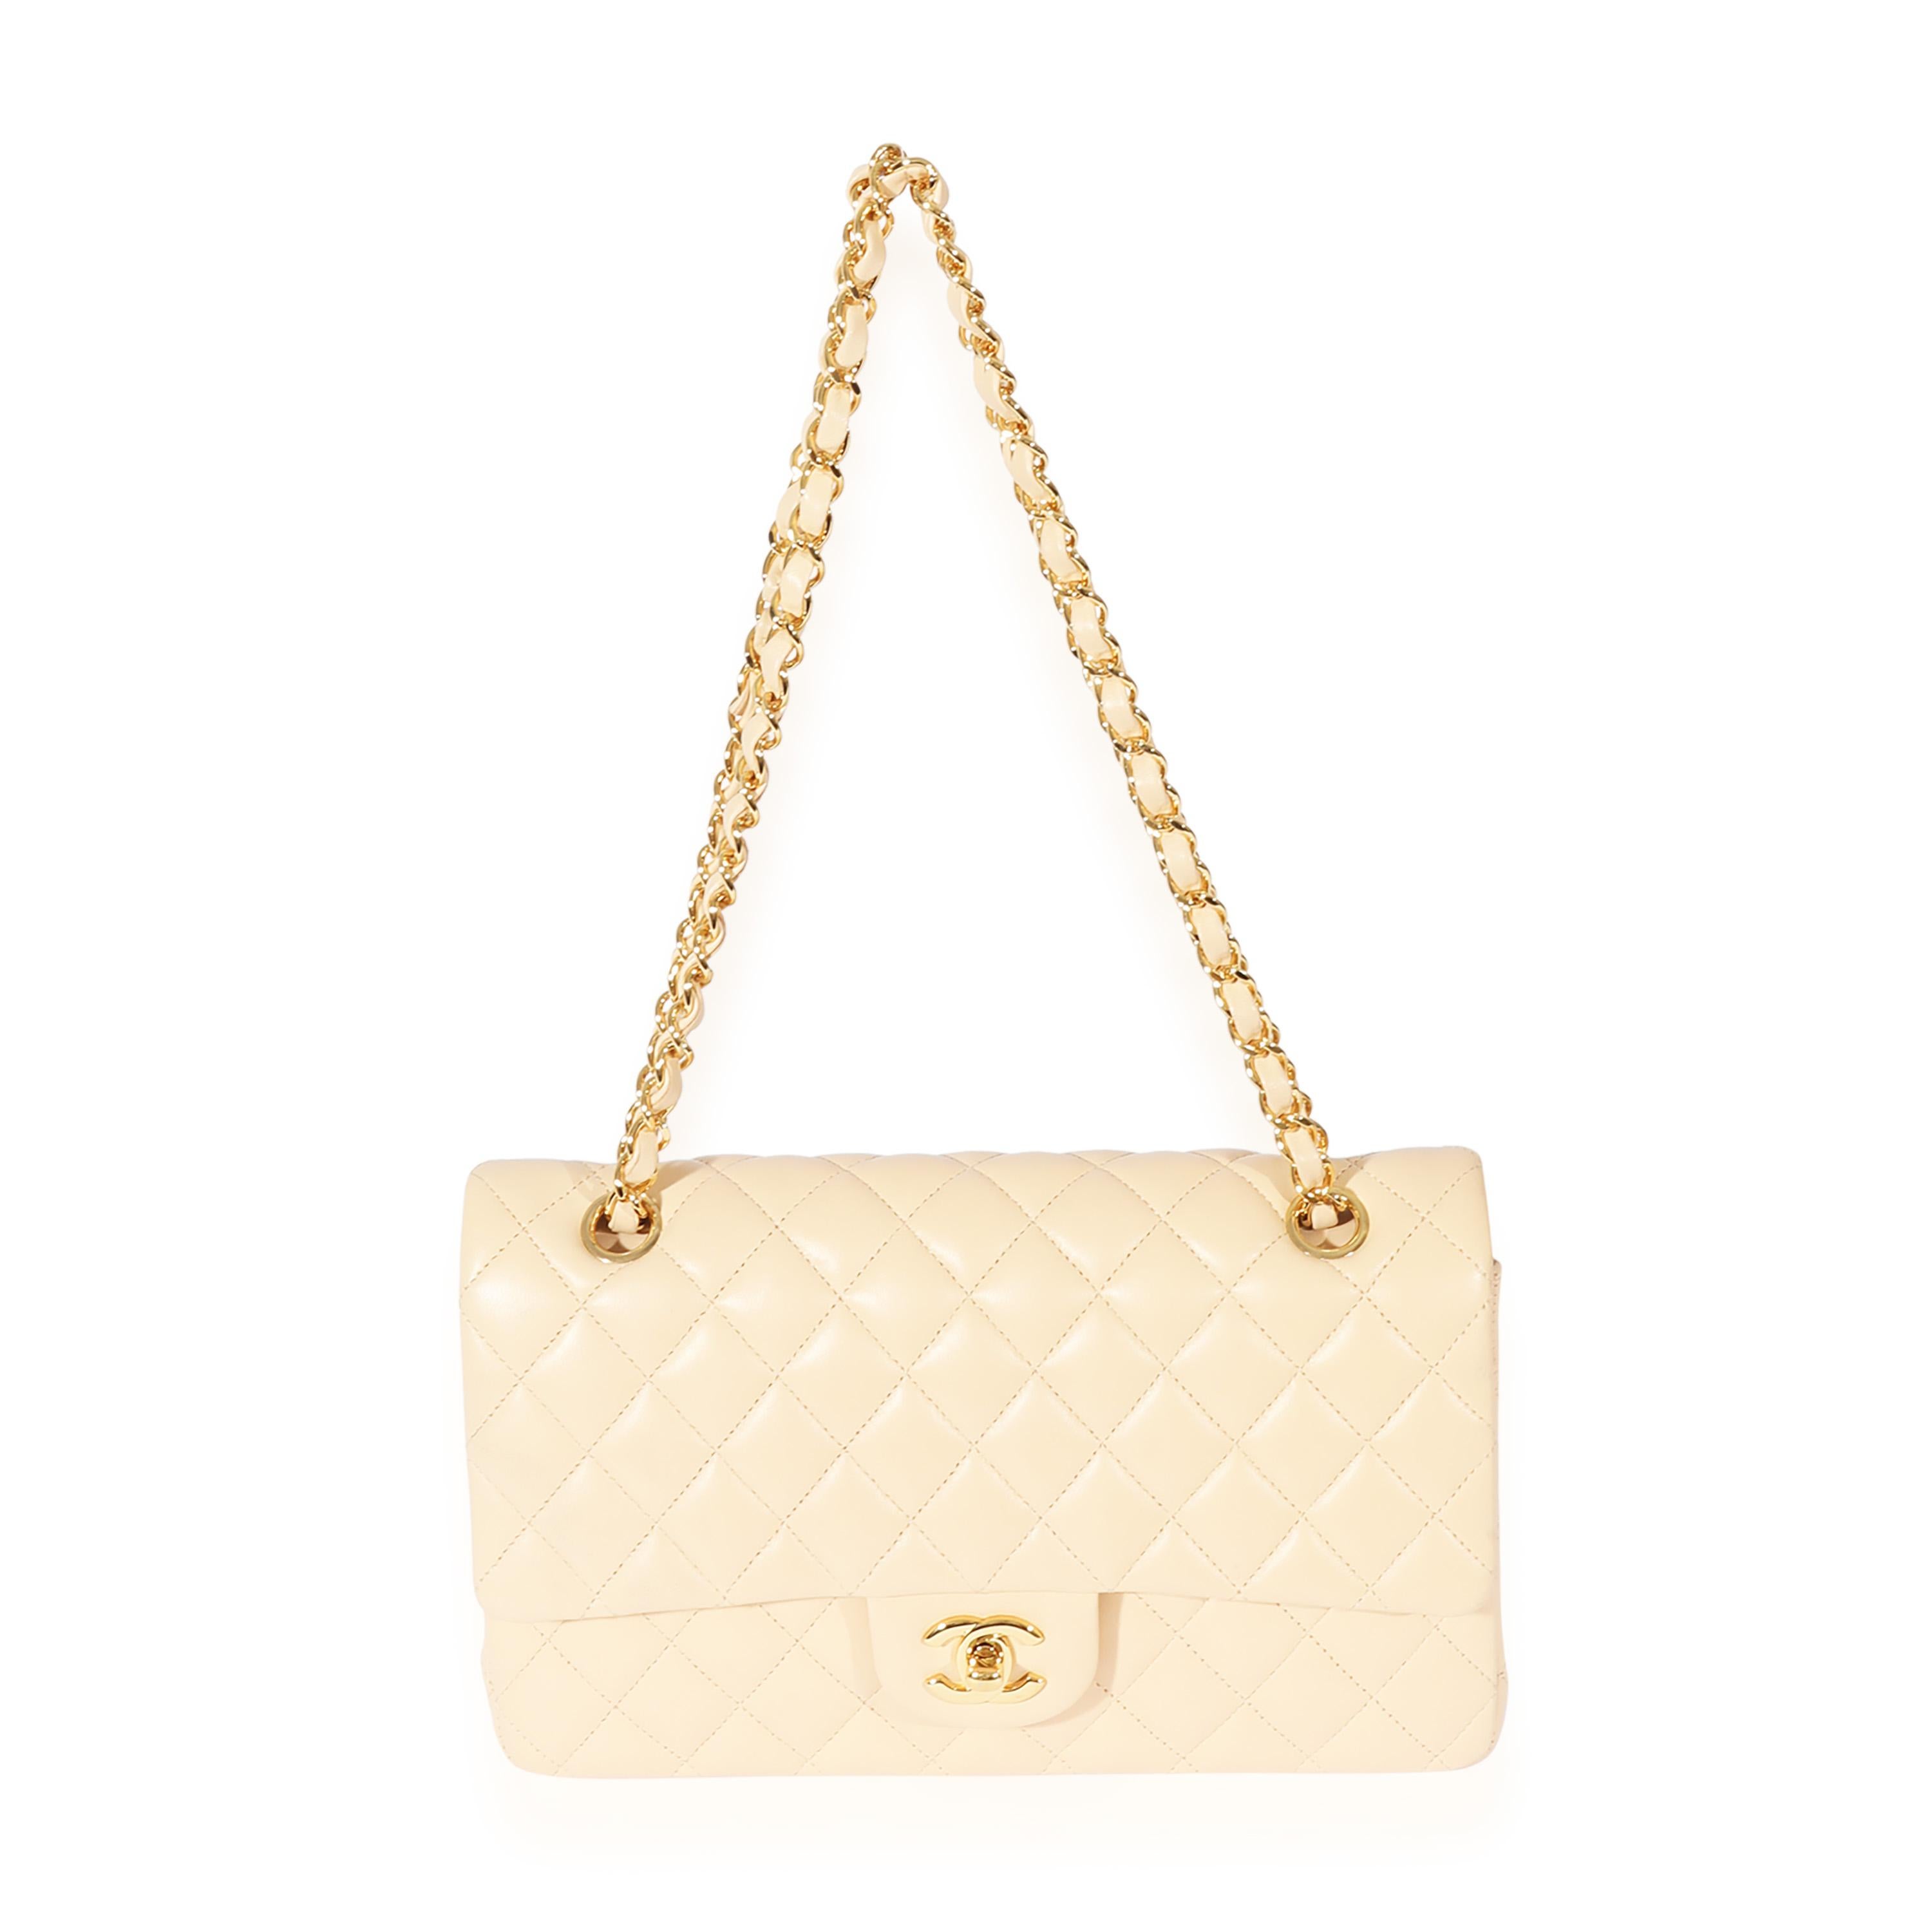 Listing Title: Chanel Beige Lambskin Medium Classic Flap Bag
SKU: 127764
MSRP: 8800.00
Condition: Pre-owned 
Handbag Condition: Very Good
Condition Comments: Very Good Condition. Exterior scuffing at corners and throughout. Light scratching at